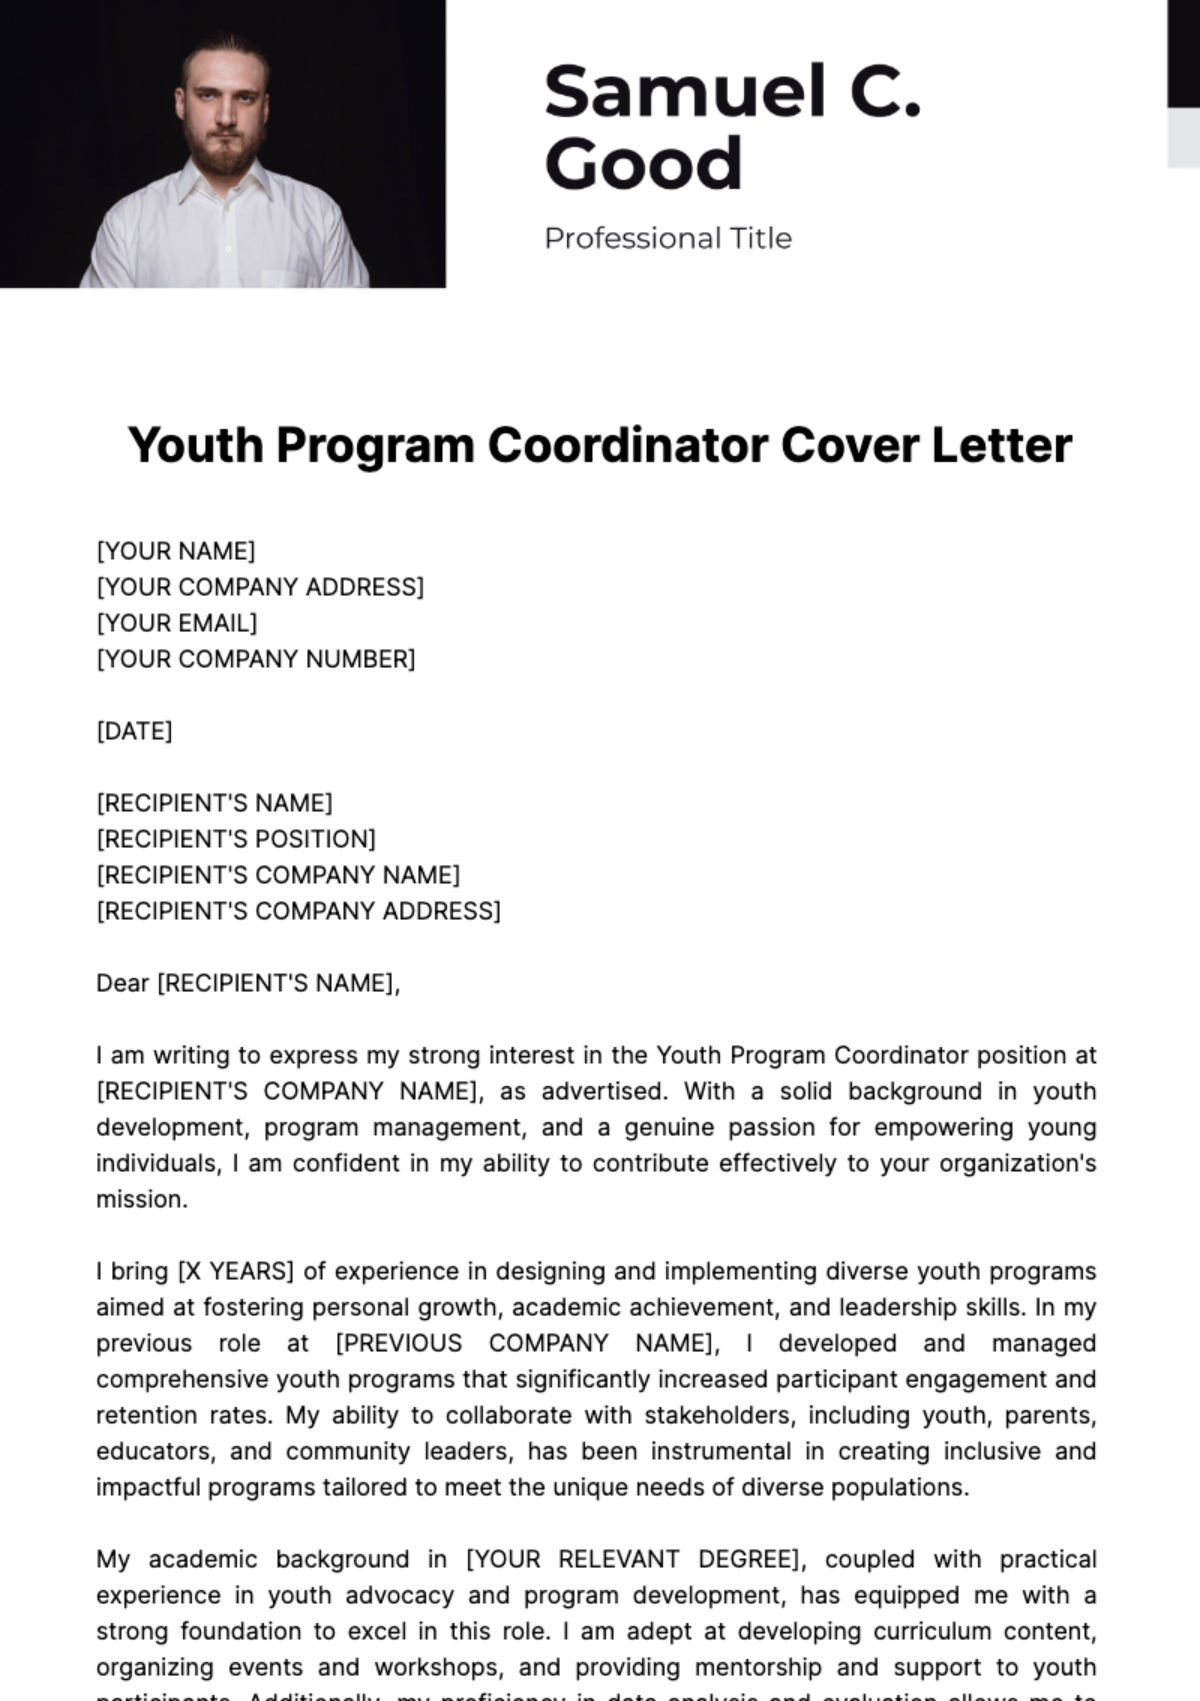 Youth Program Coordinator Cover Letter Template